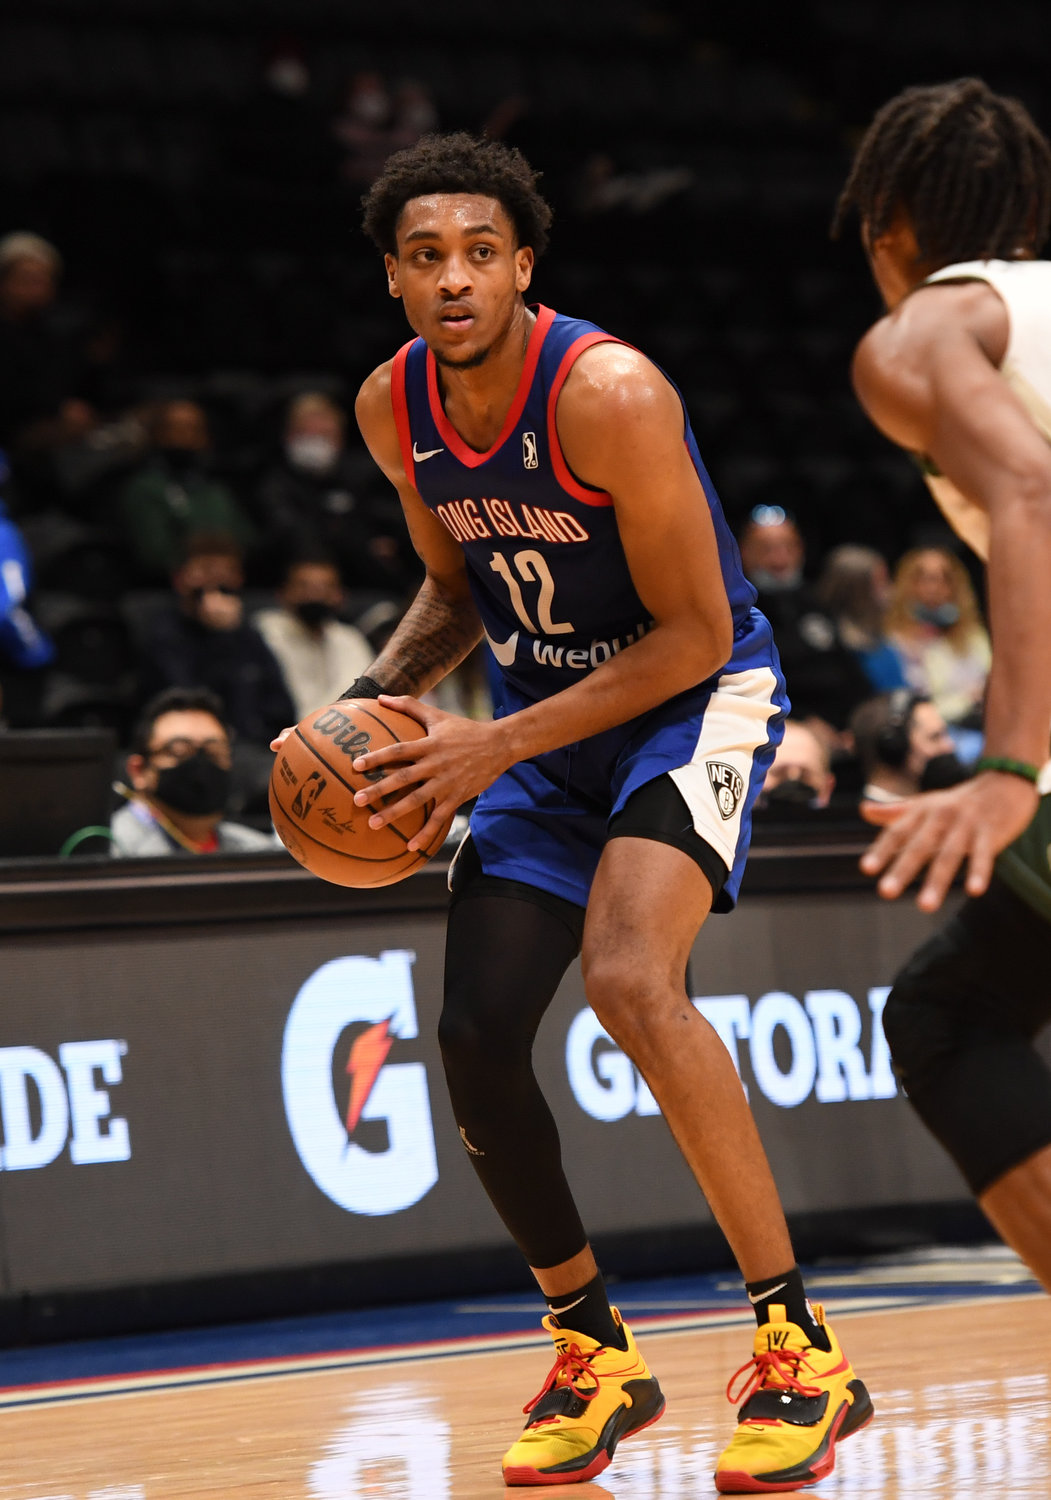 Long Island forward and NBA G League Player of the Week Craig Randall II recorded 21 points in its loss to Wisconsin on Jan. 14.